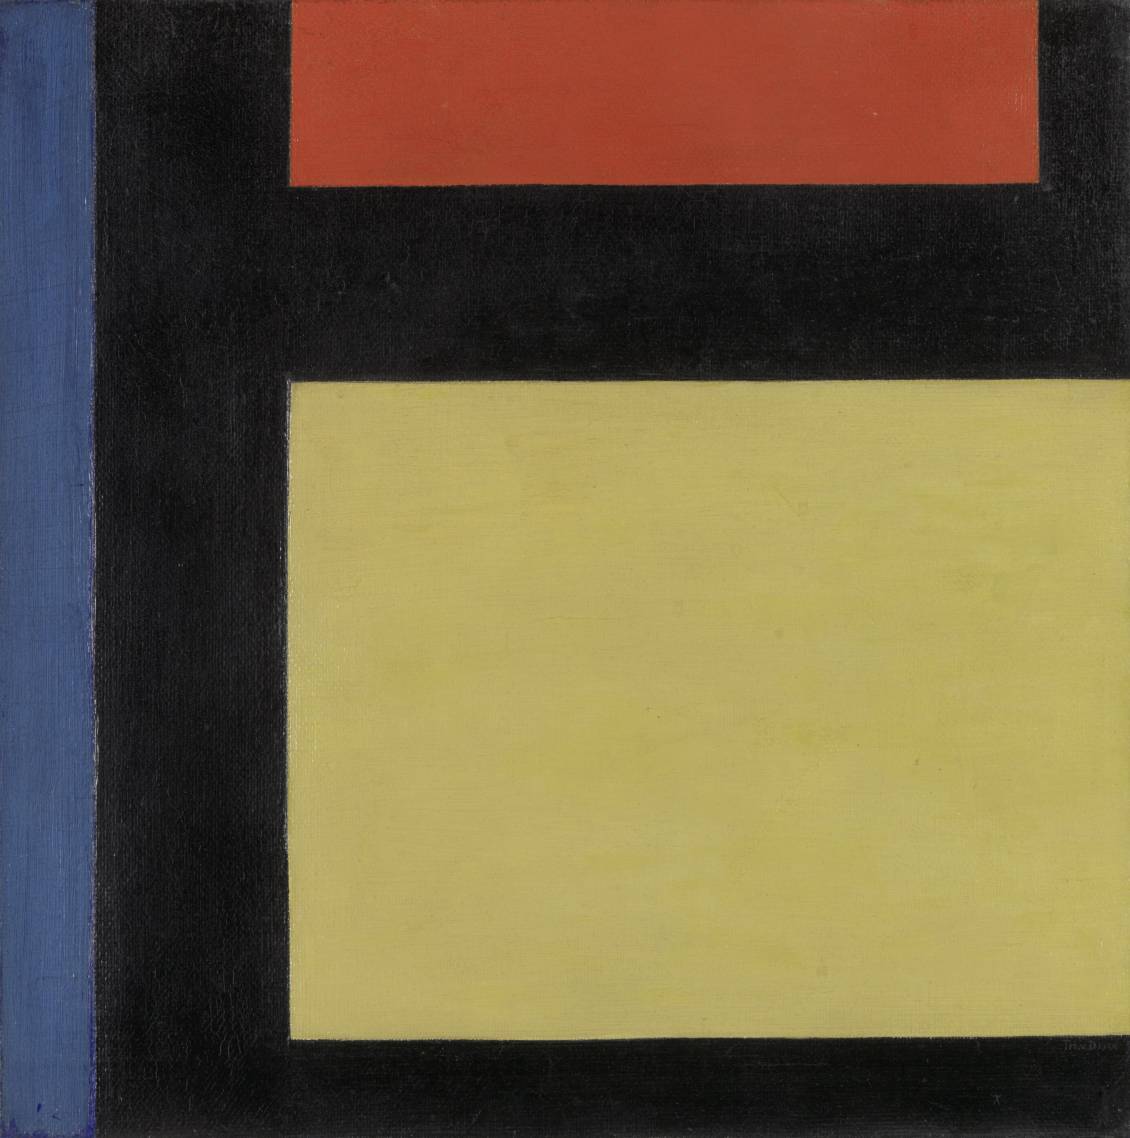 Theo van Doesburg, Contra-composition X, 1924